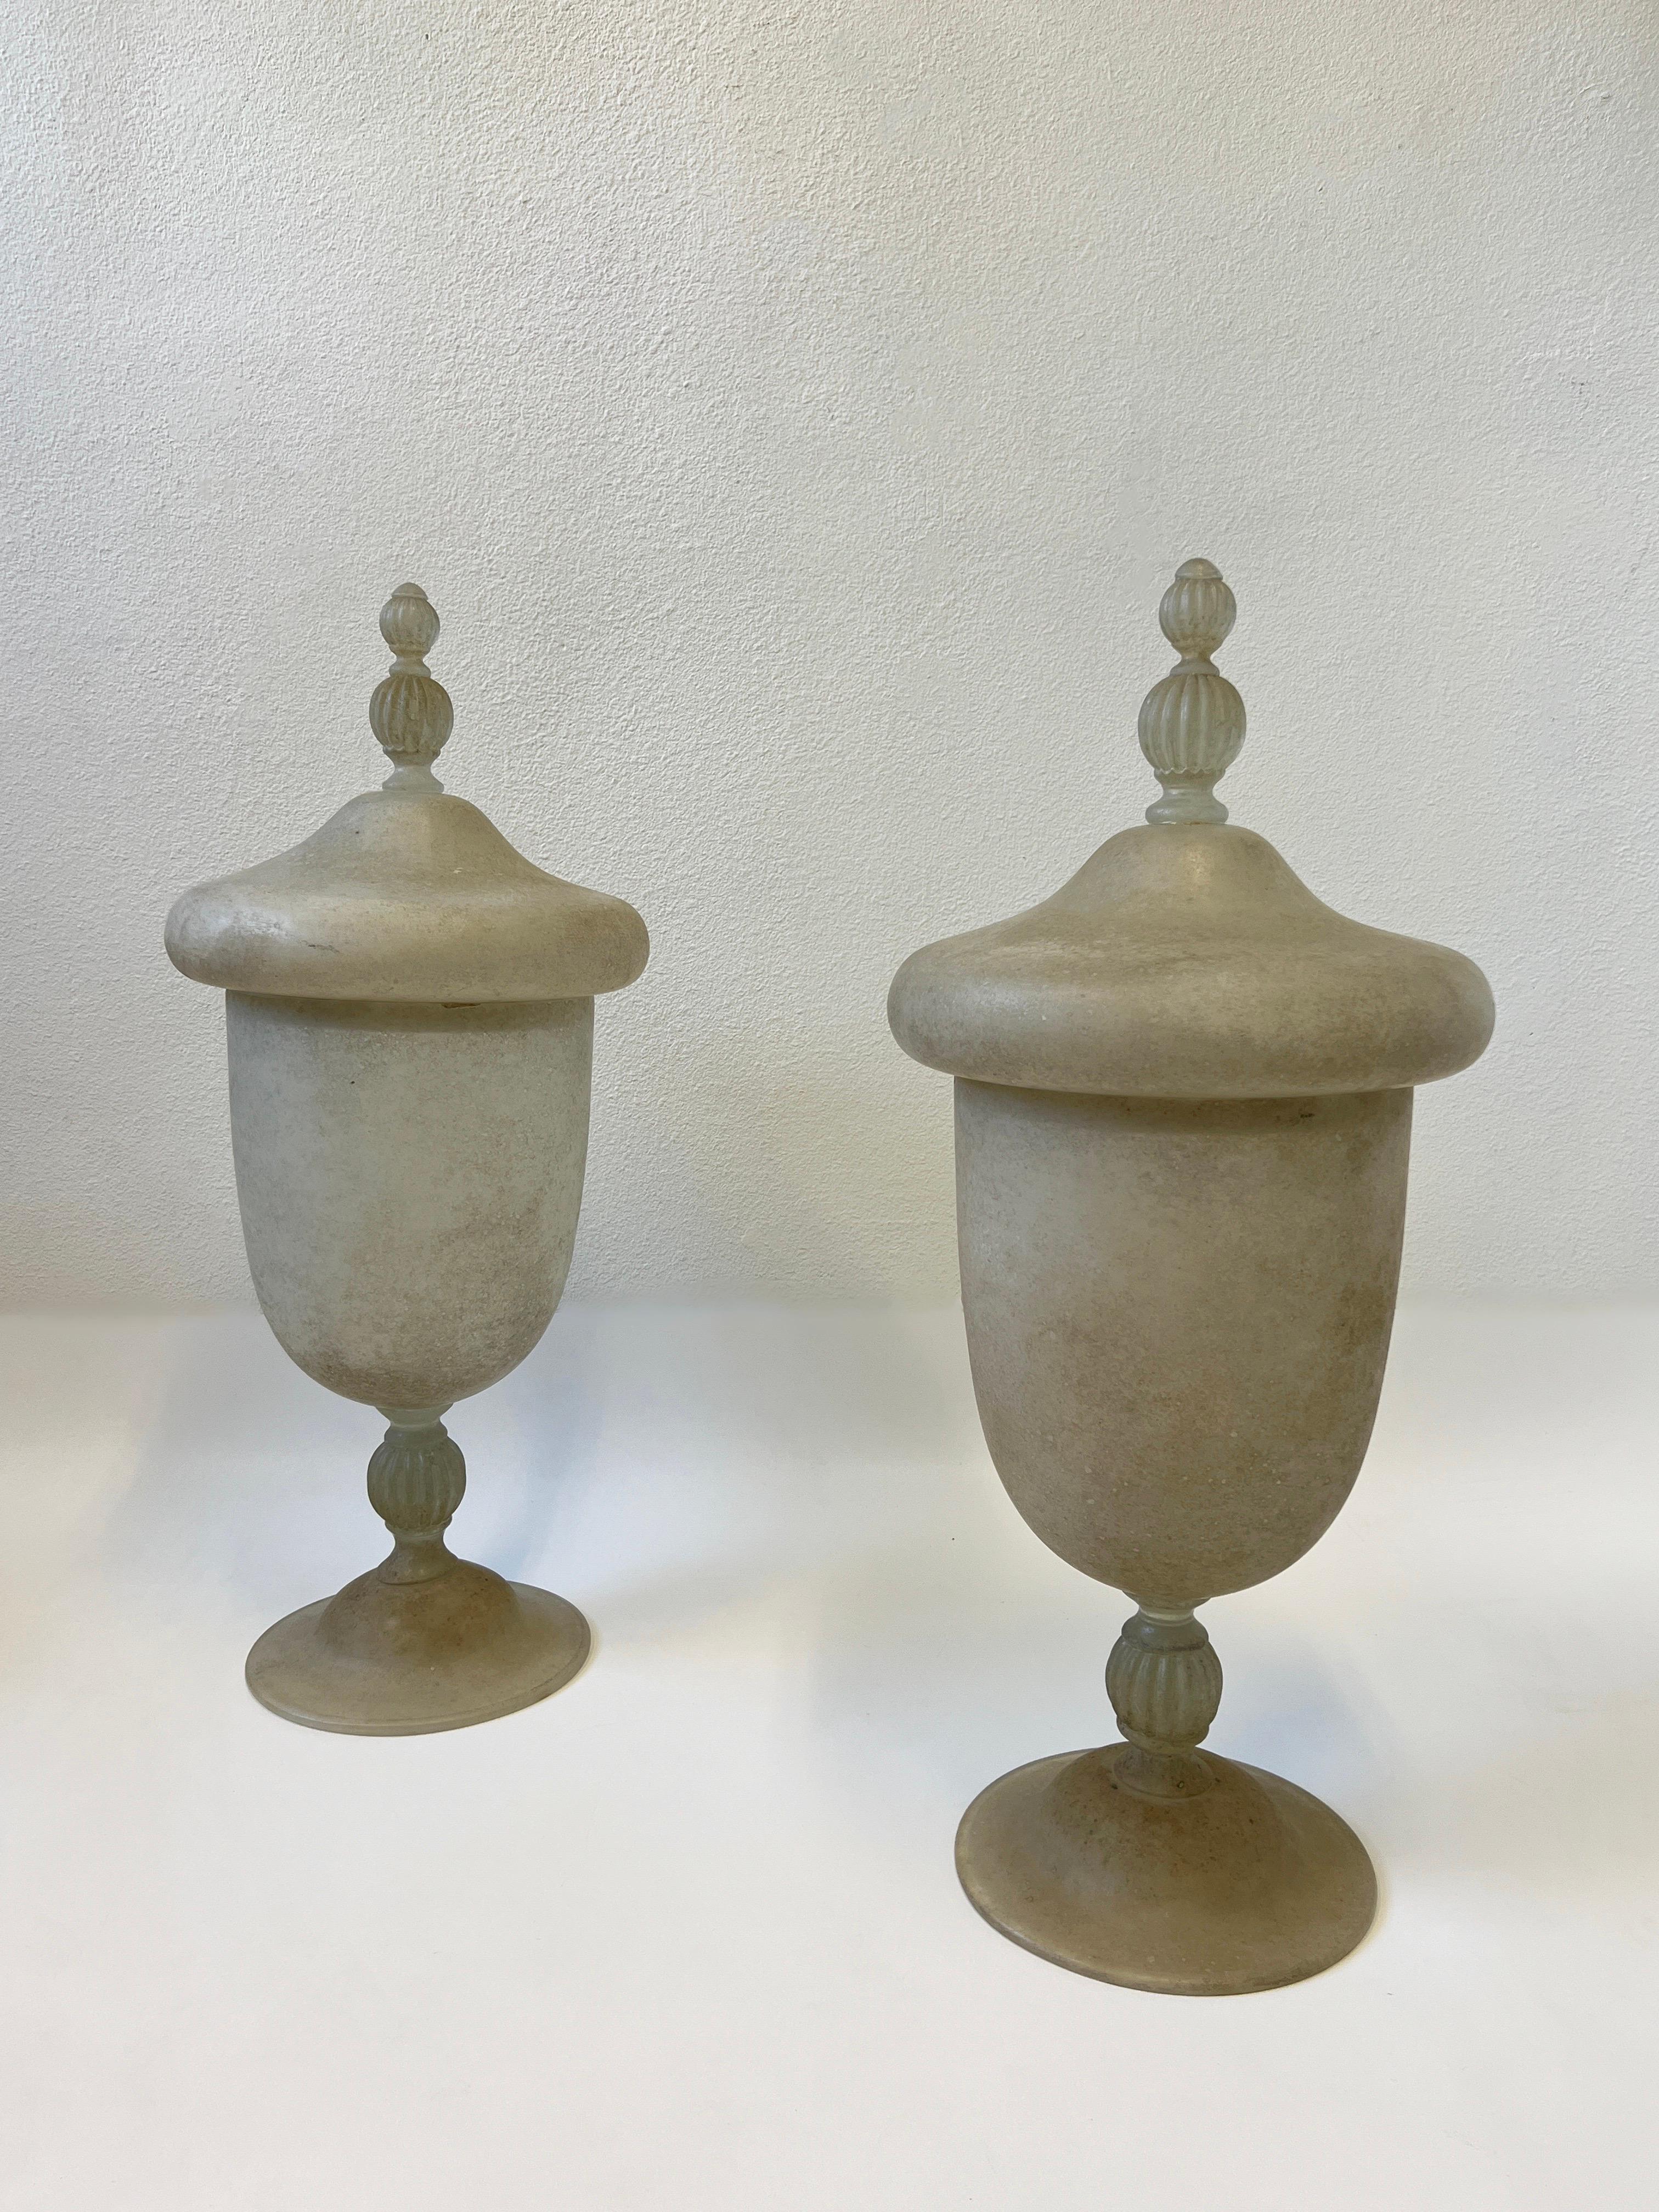 Pair of 1980’s Italian scavo Murano glass large vases or urns. 
They are in the style of Karl Springer. 
This are in beautiful condition no chips. They have a rough texture finish.
Measurements 34.5” High, 15” Diameter, 11.5” Diameter at bottom